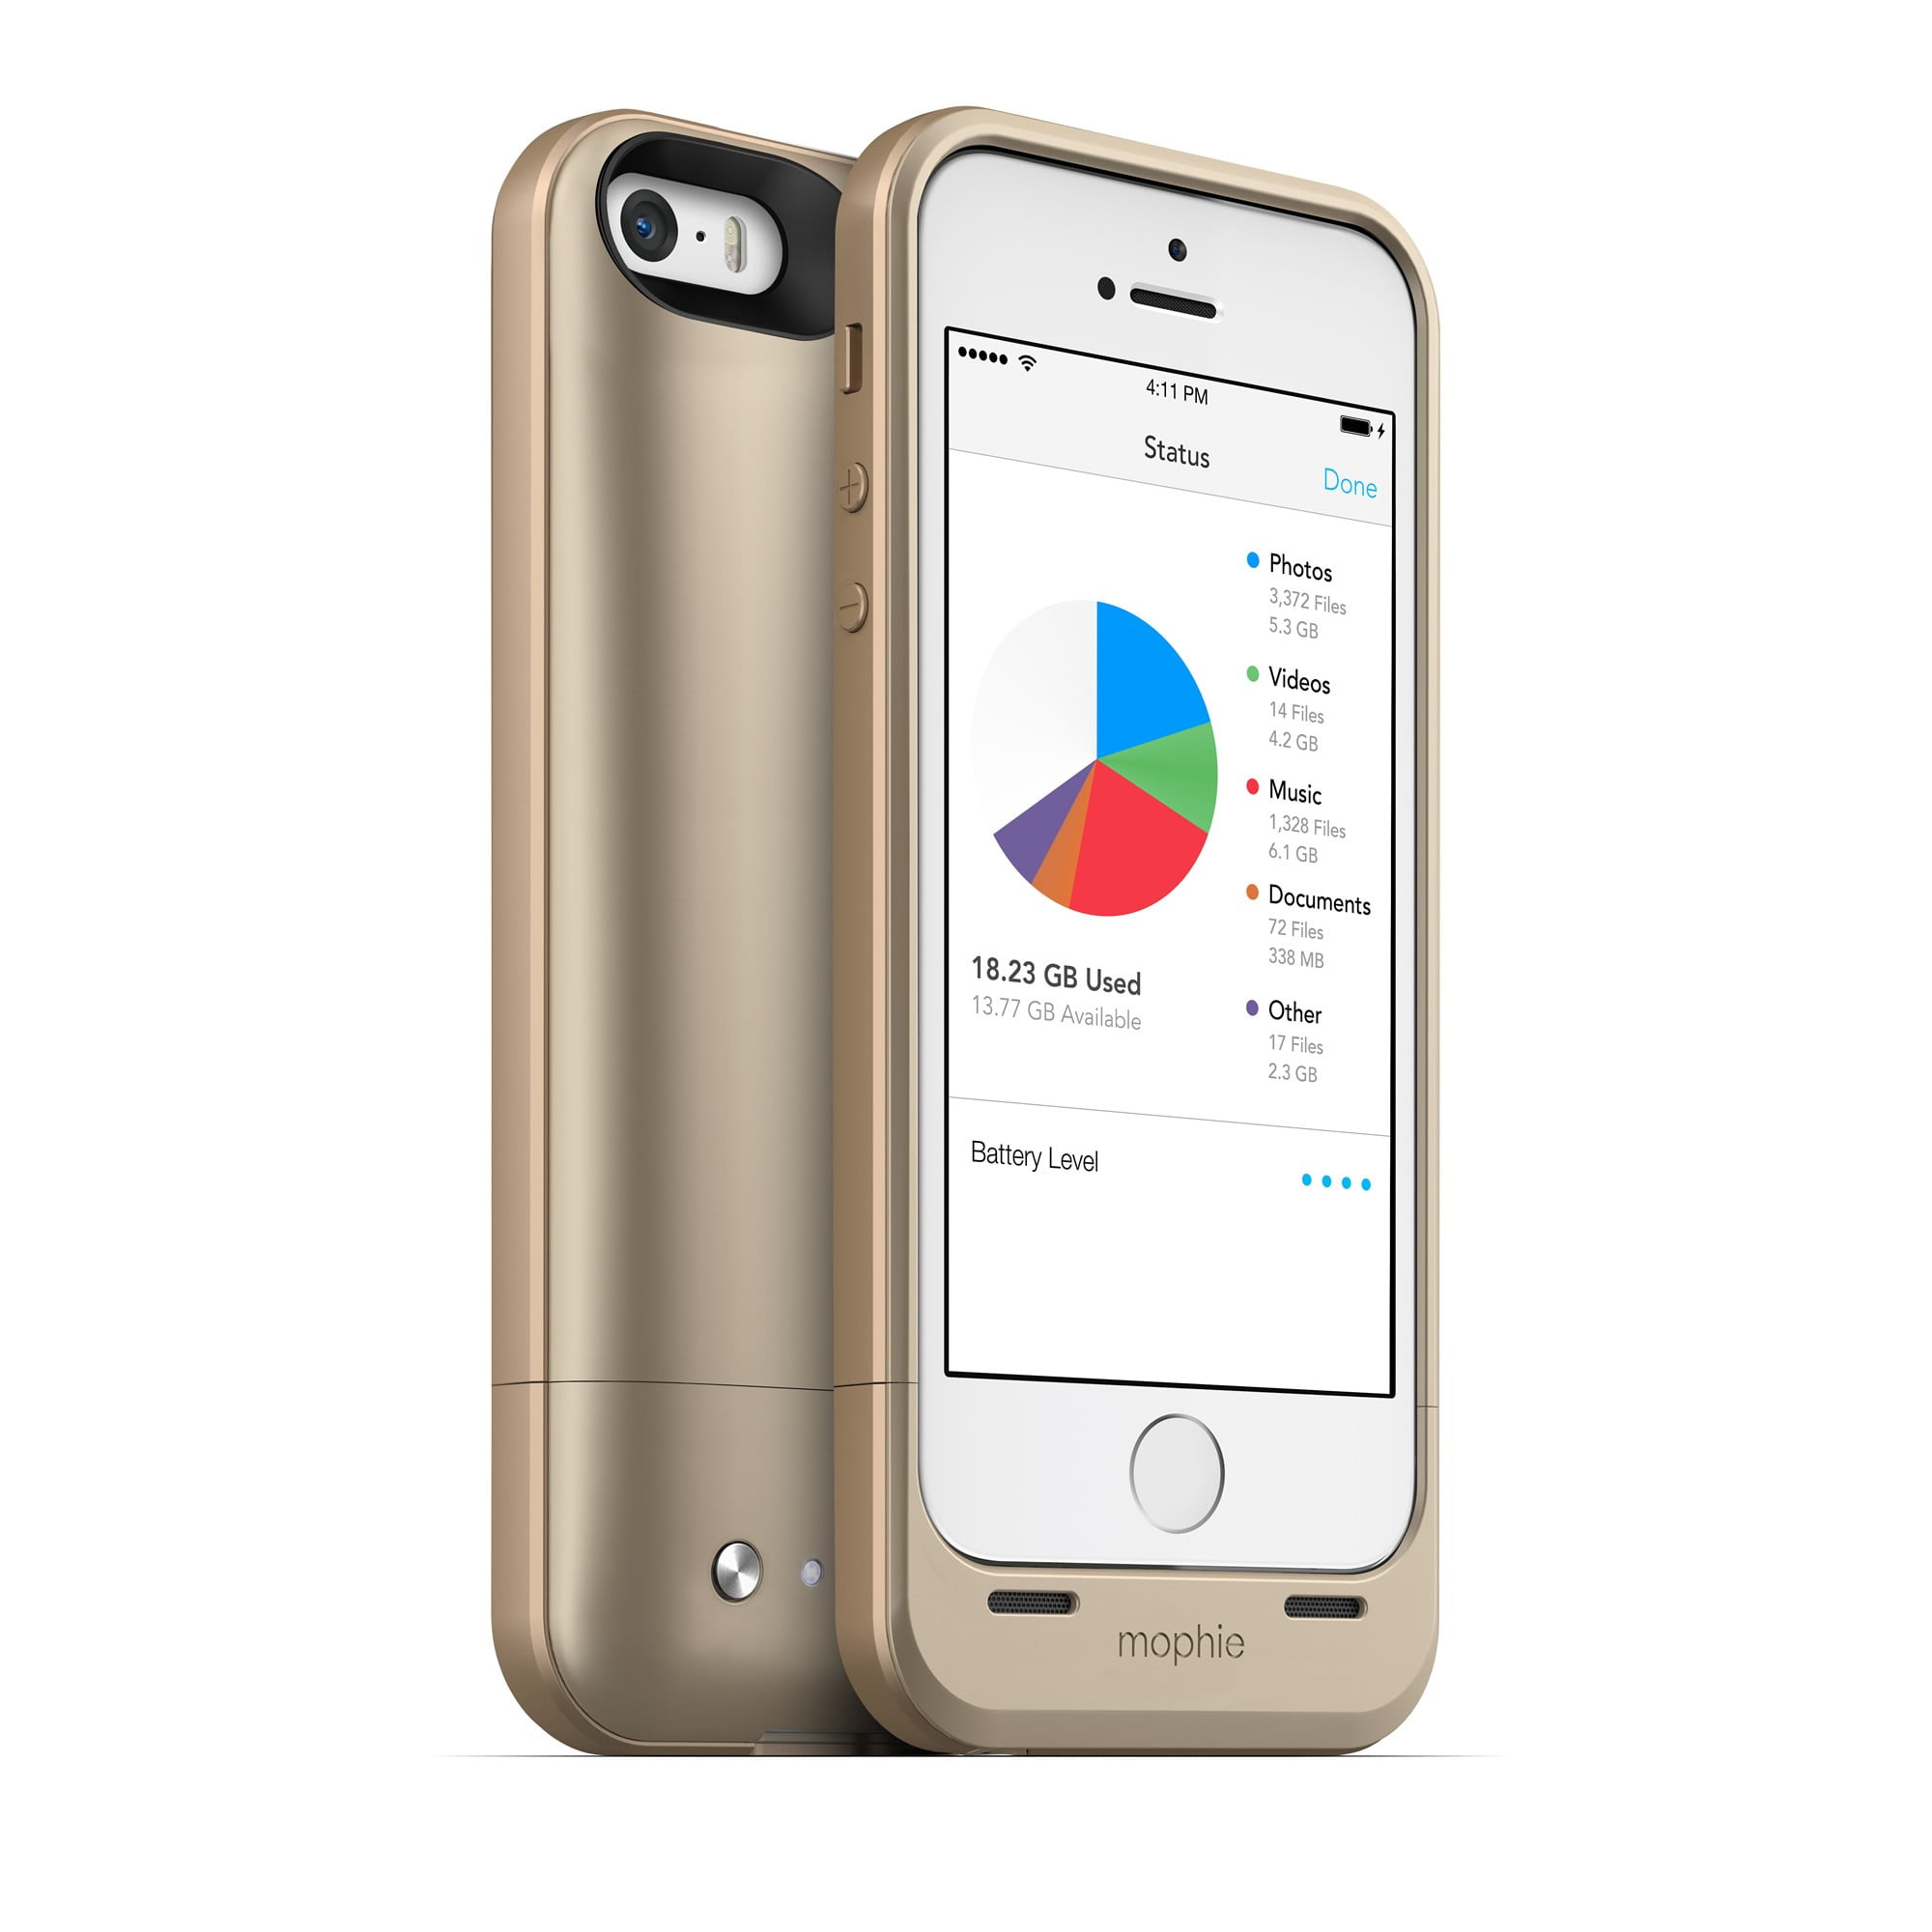 mophie 2936 Space Pack External Battery Case 32GB for iPhone 5, 5s and SE  Gold (Refurbished)